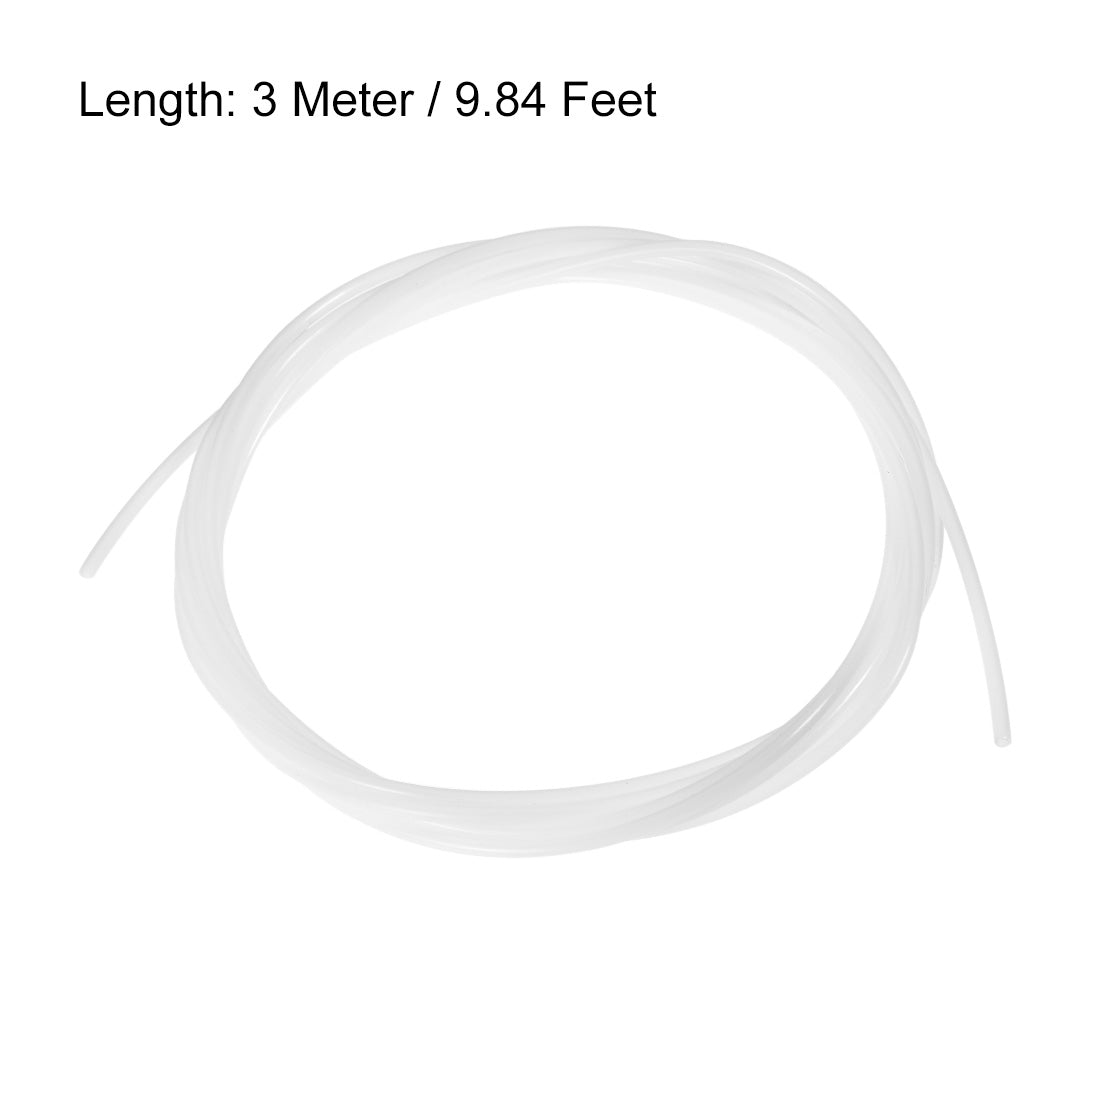 uxcell Uxcell PTFE Tube 9.8Ft - ID 2mm x OD 3mm Fit 1.75 Filament for 3D Printer White